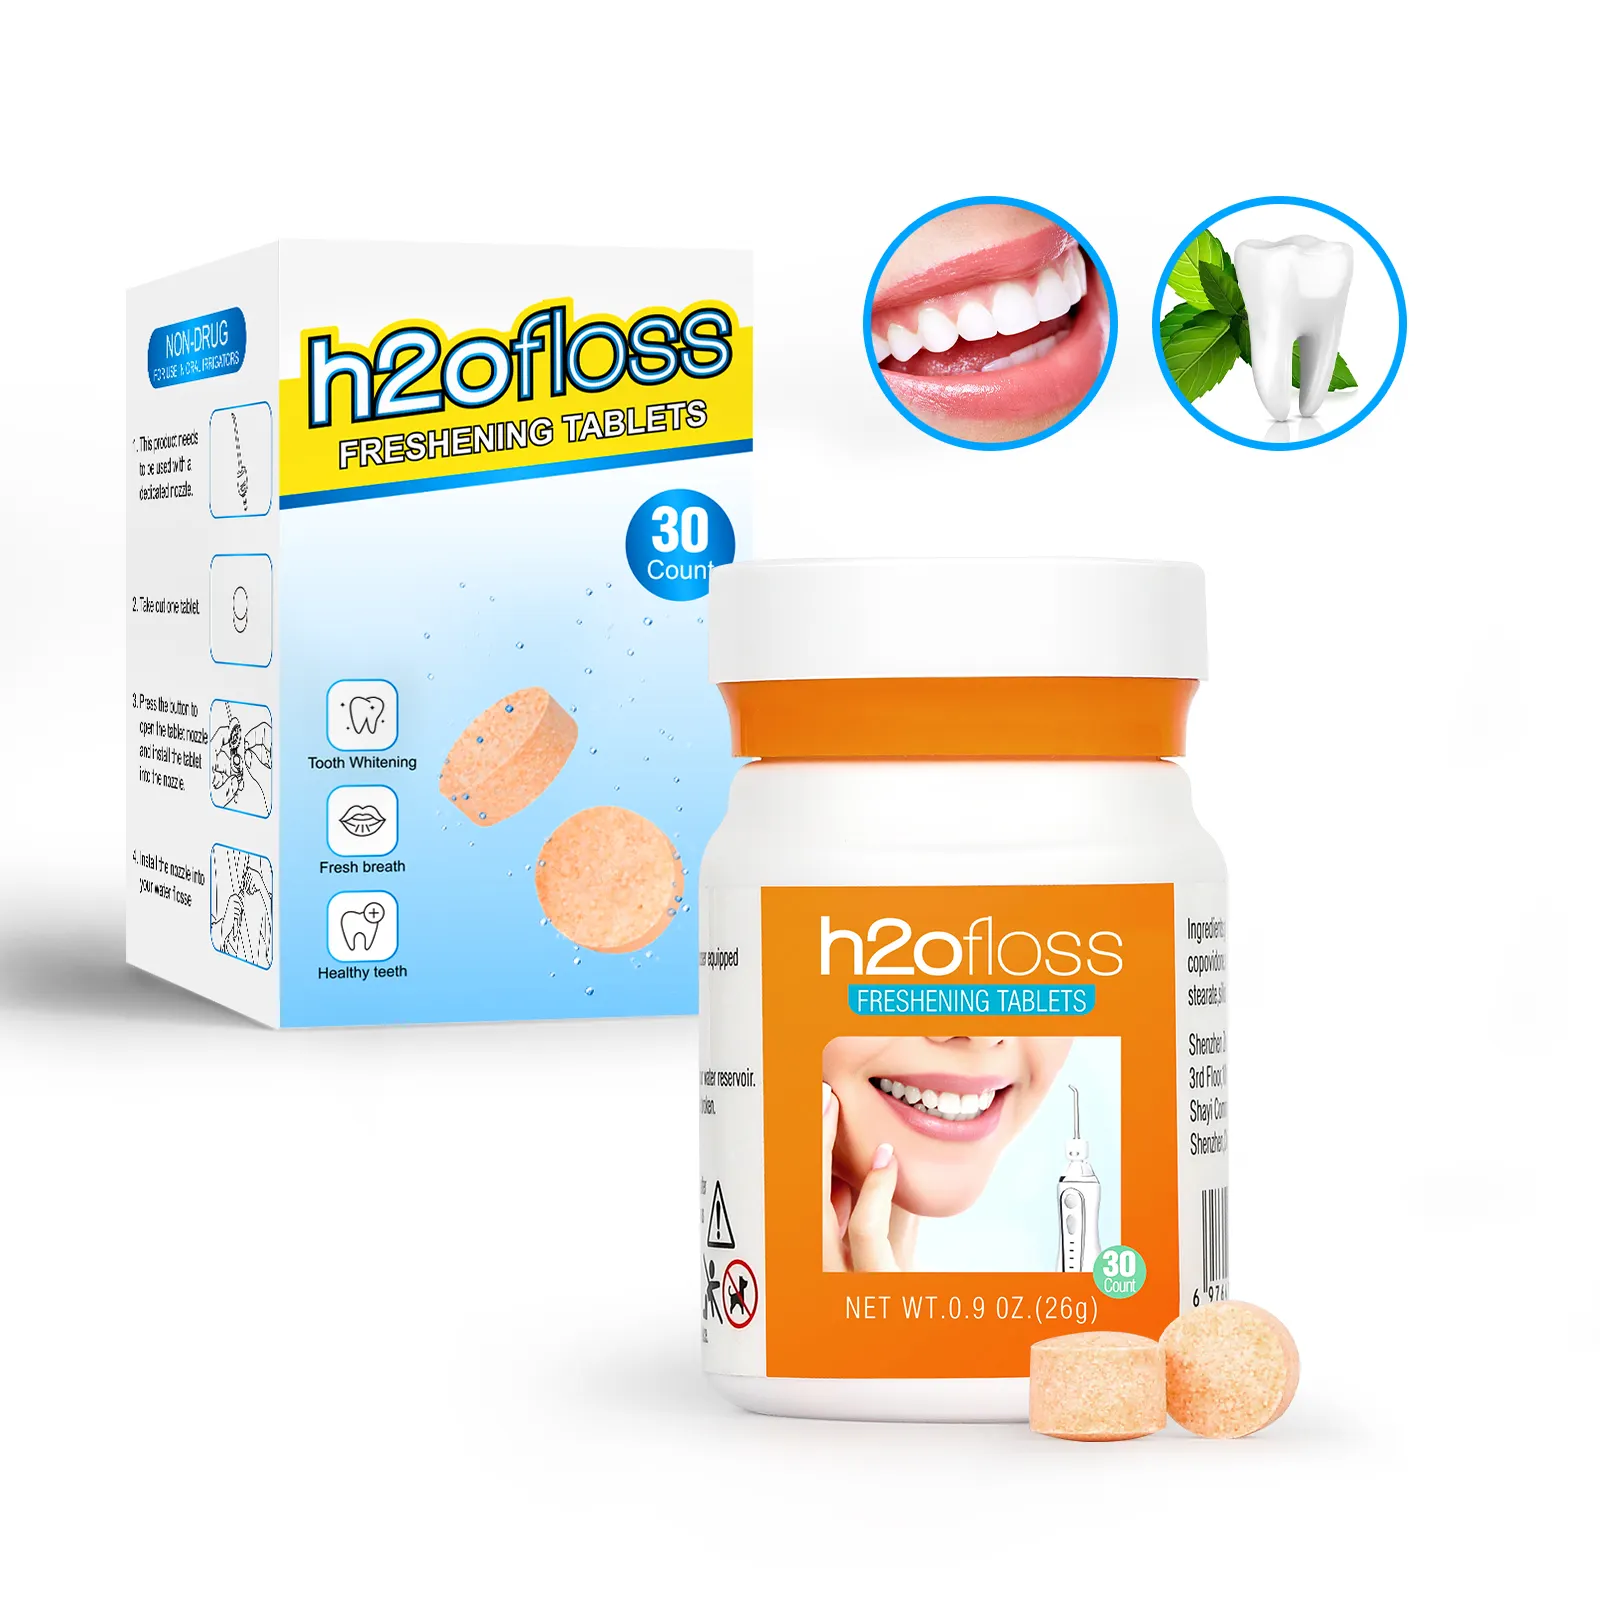 H2ofloss Professional breath freshning tablets for use with oral irrigator to remove bad breath odor